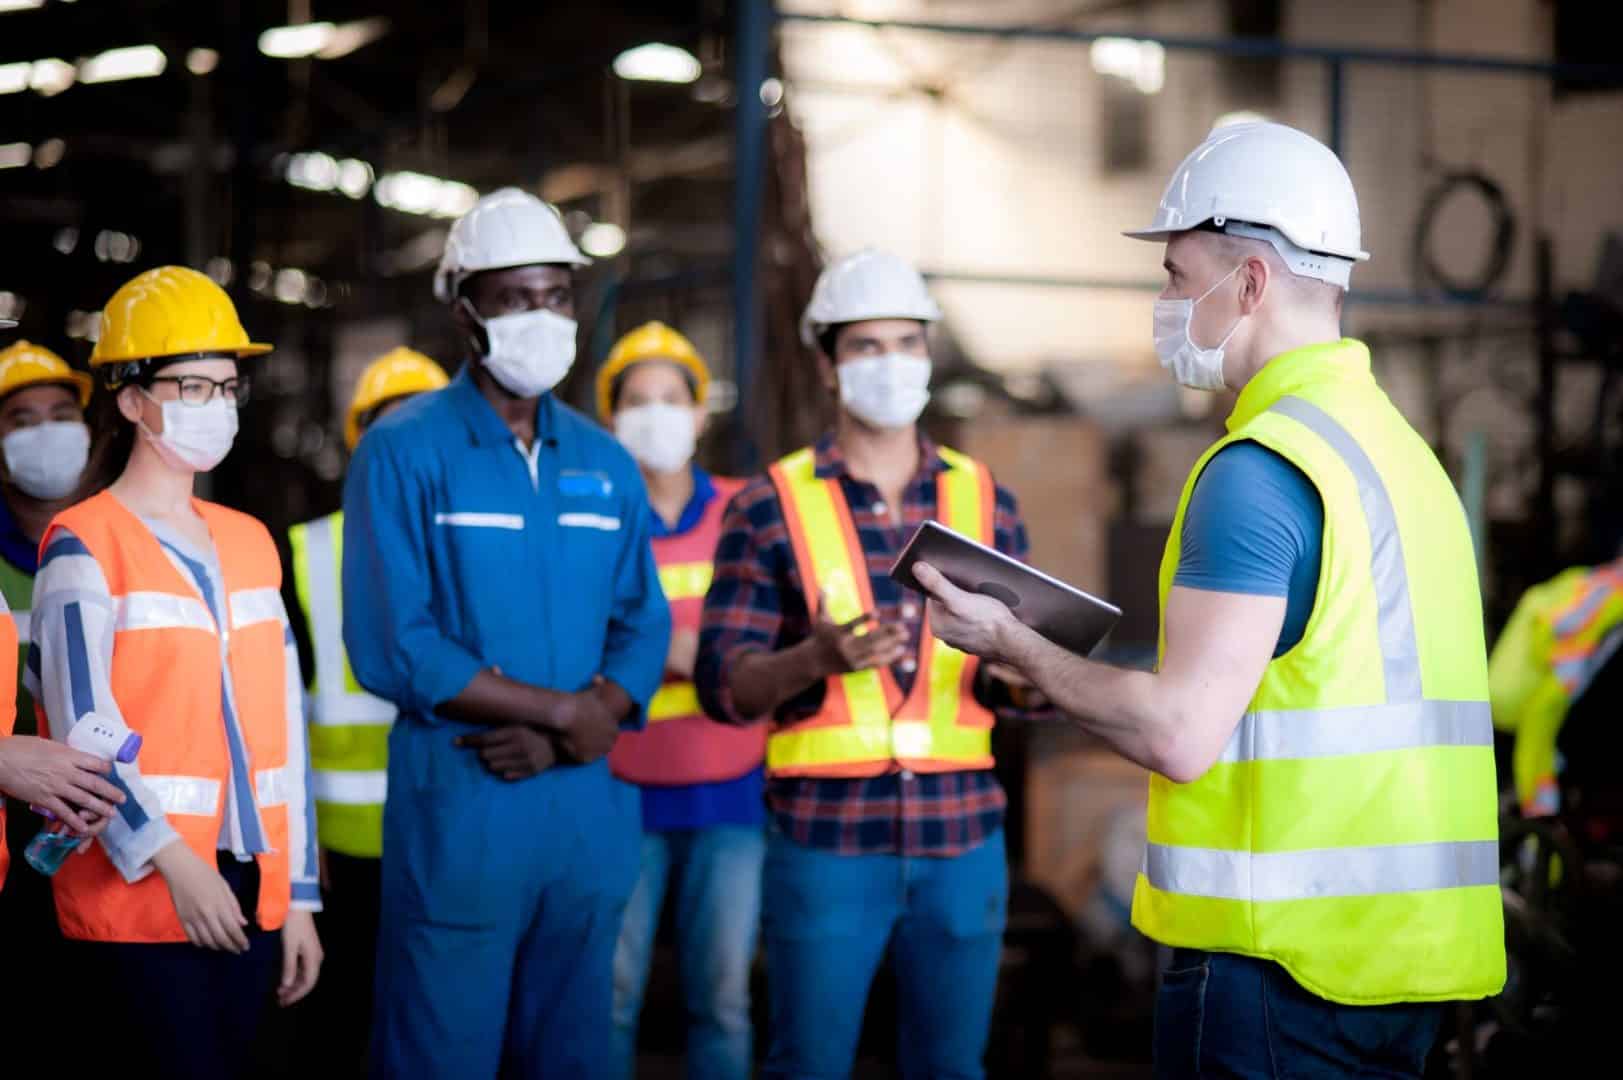 Safety training at the warehouse